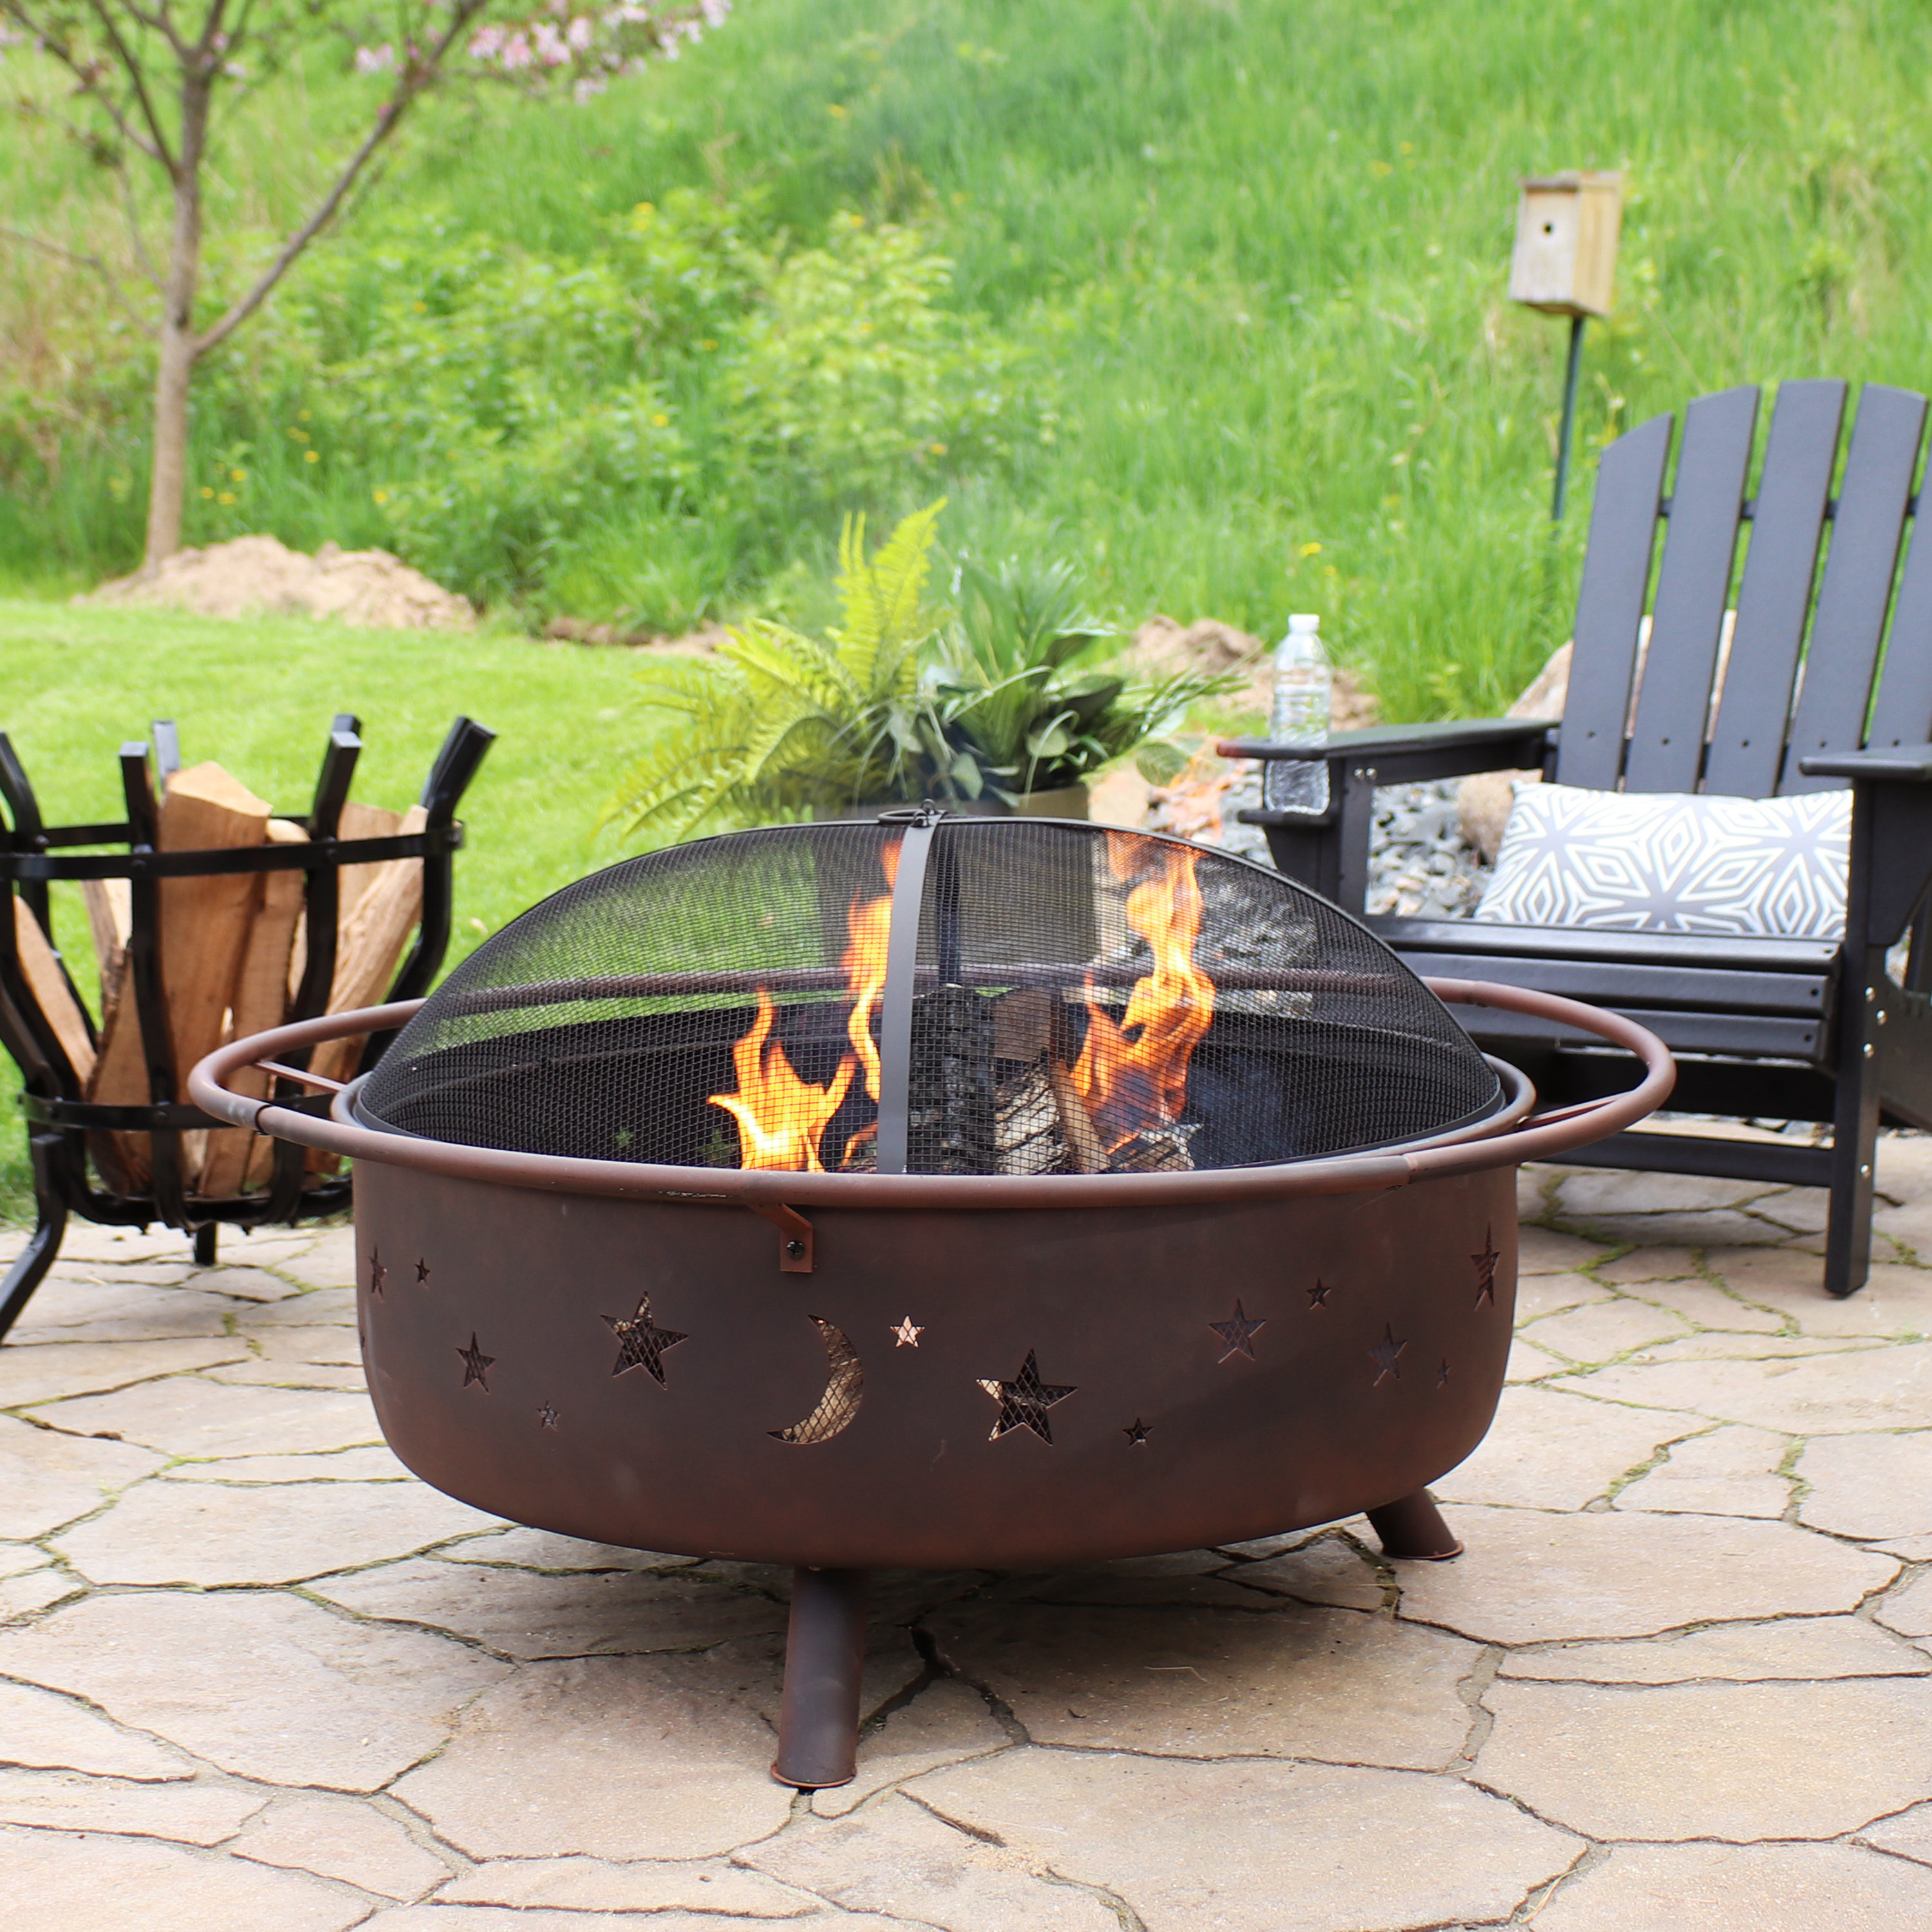 Arlmont & Co. Gustafson Steel Wood Burning Fire Pit & Reviews